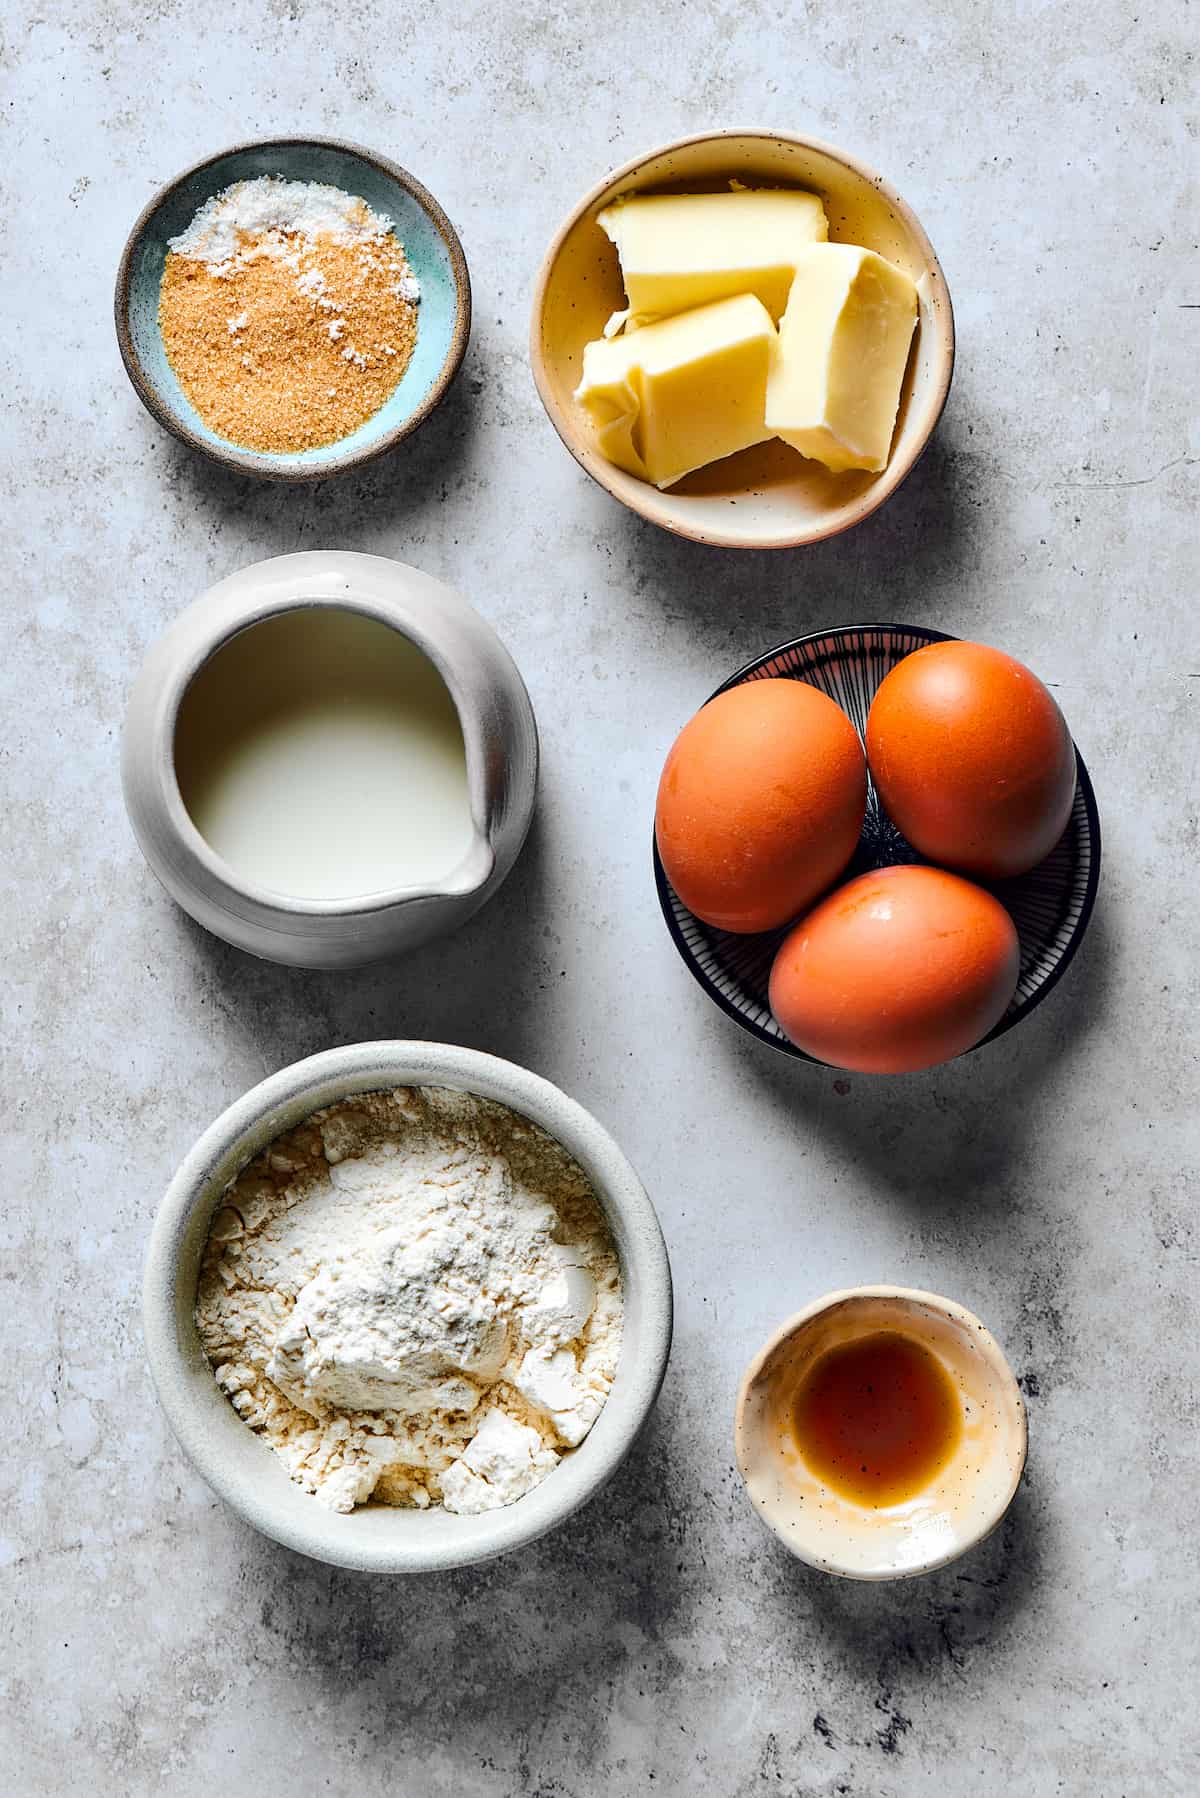 Ingredients for a Dutch baby pancake measured into small dishes and arranged on a work surface.